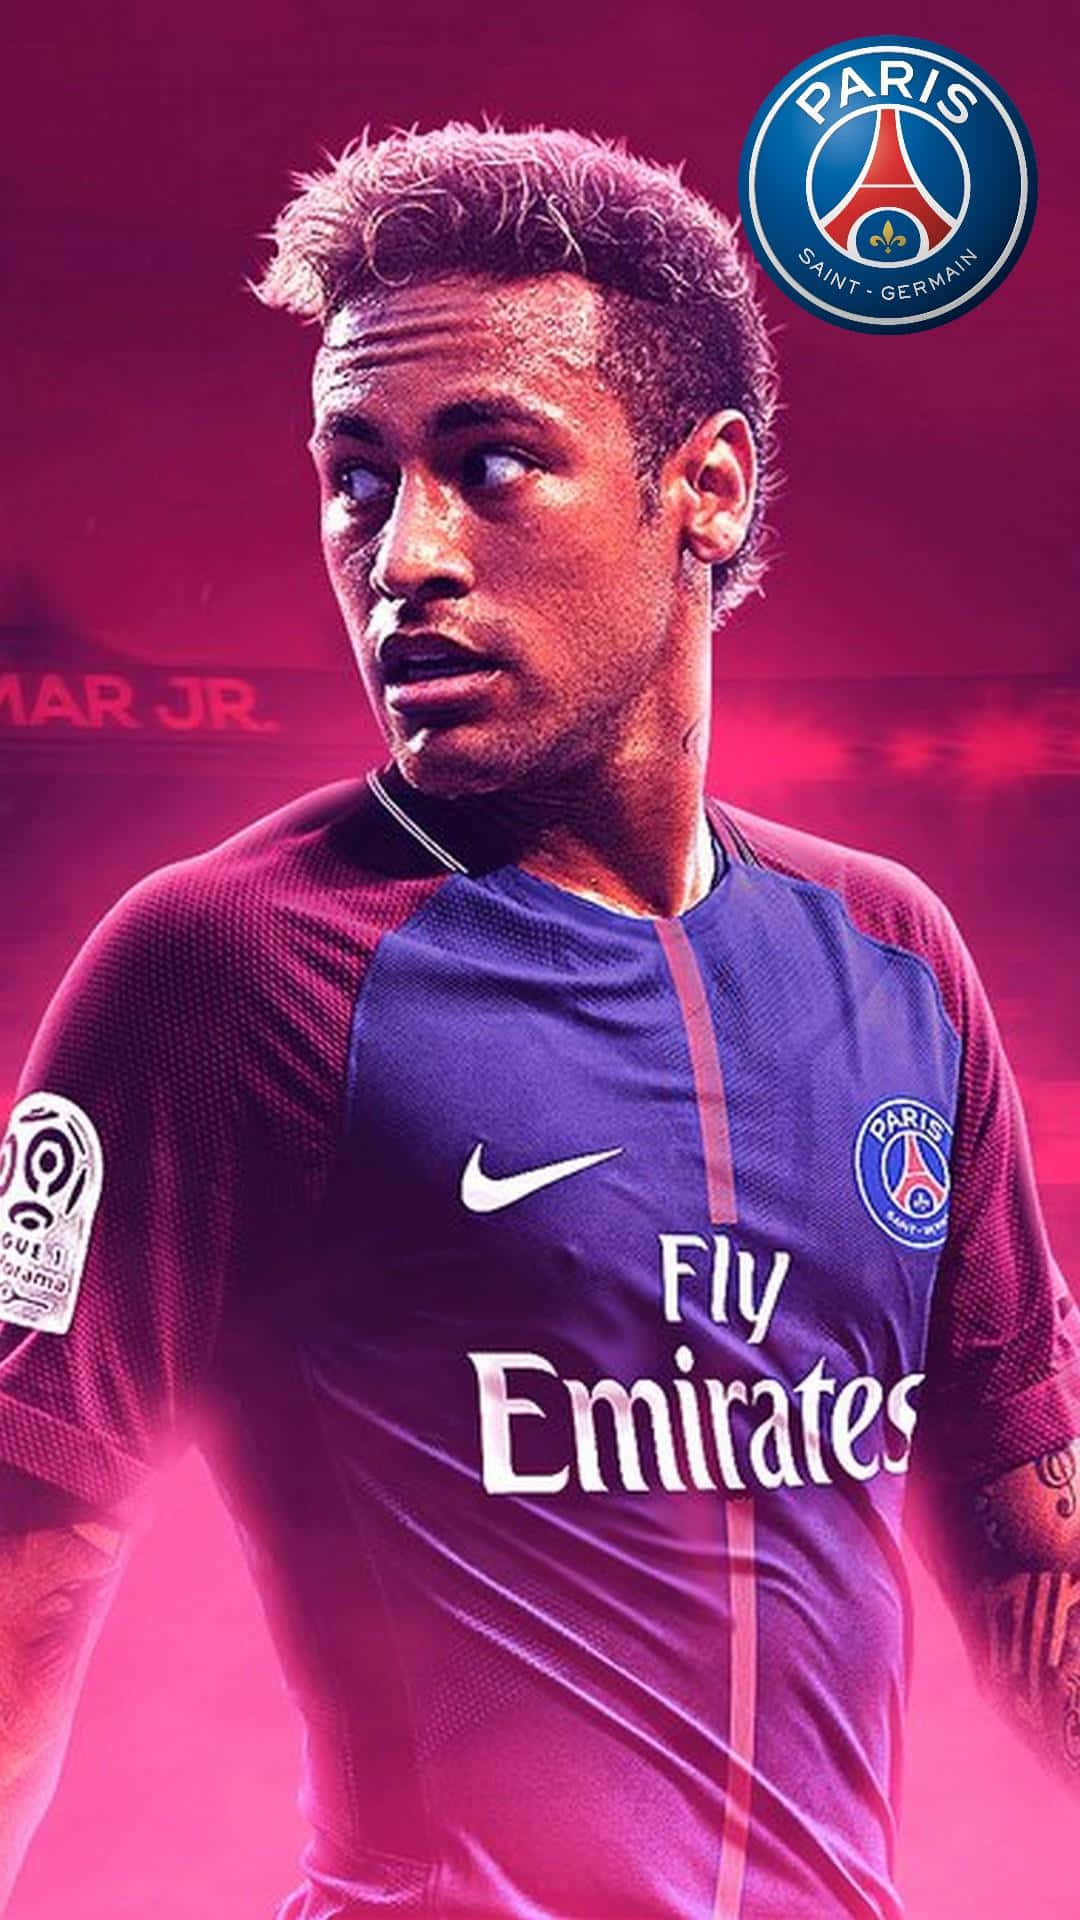 Neymar Jr Wallpaper iPhone with image resolution 1080x1920 pixel. You can make this wallpaper for your iPhone 5, 6, 7, 8, X backgrounds, Mobile Screensaver, or iPad Lock Screen - Neymar